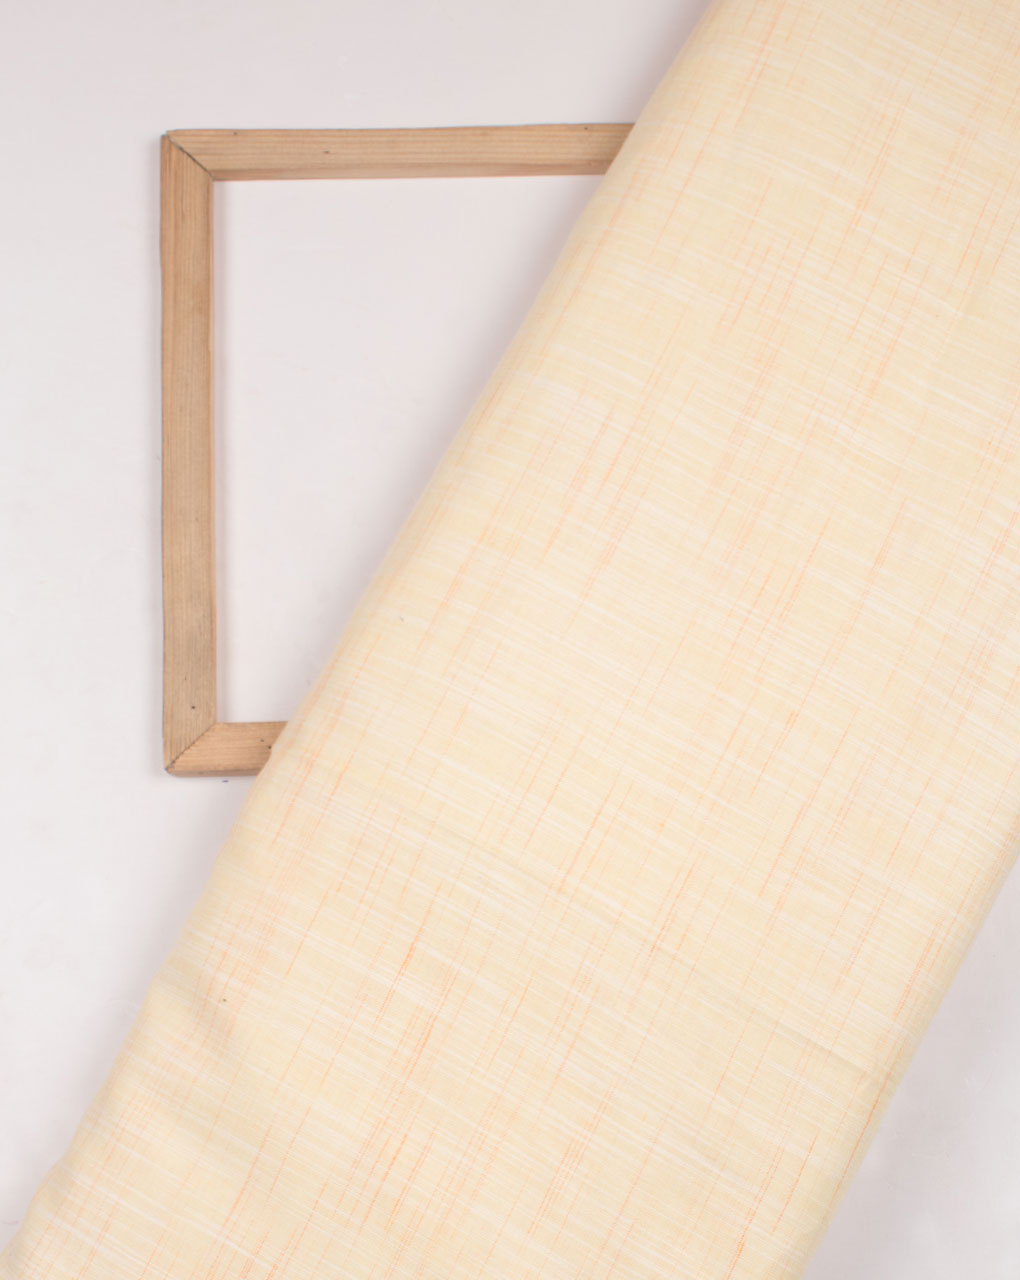 Light Yellow Abstract Woven Loom Textured Cotton Fabric - Fabriclore.com